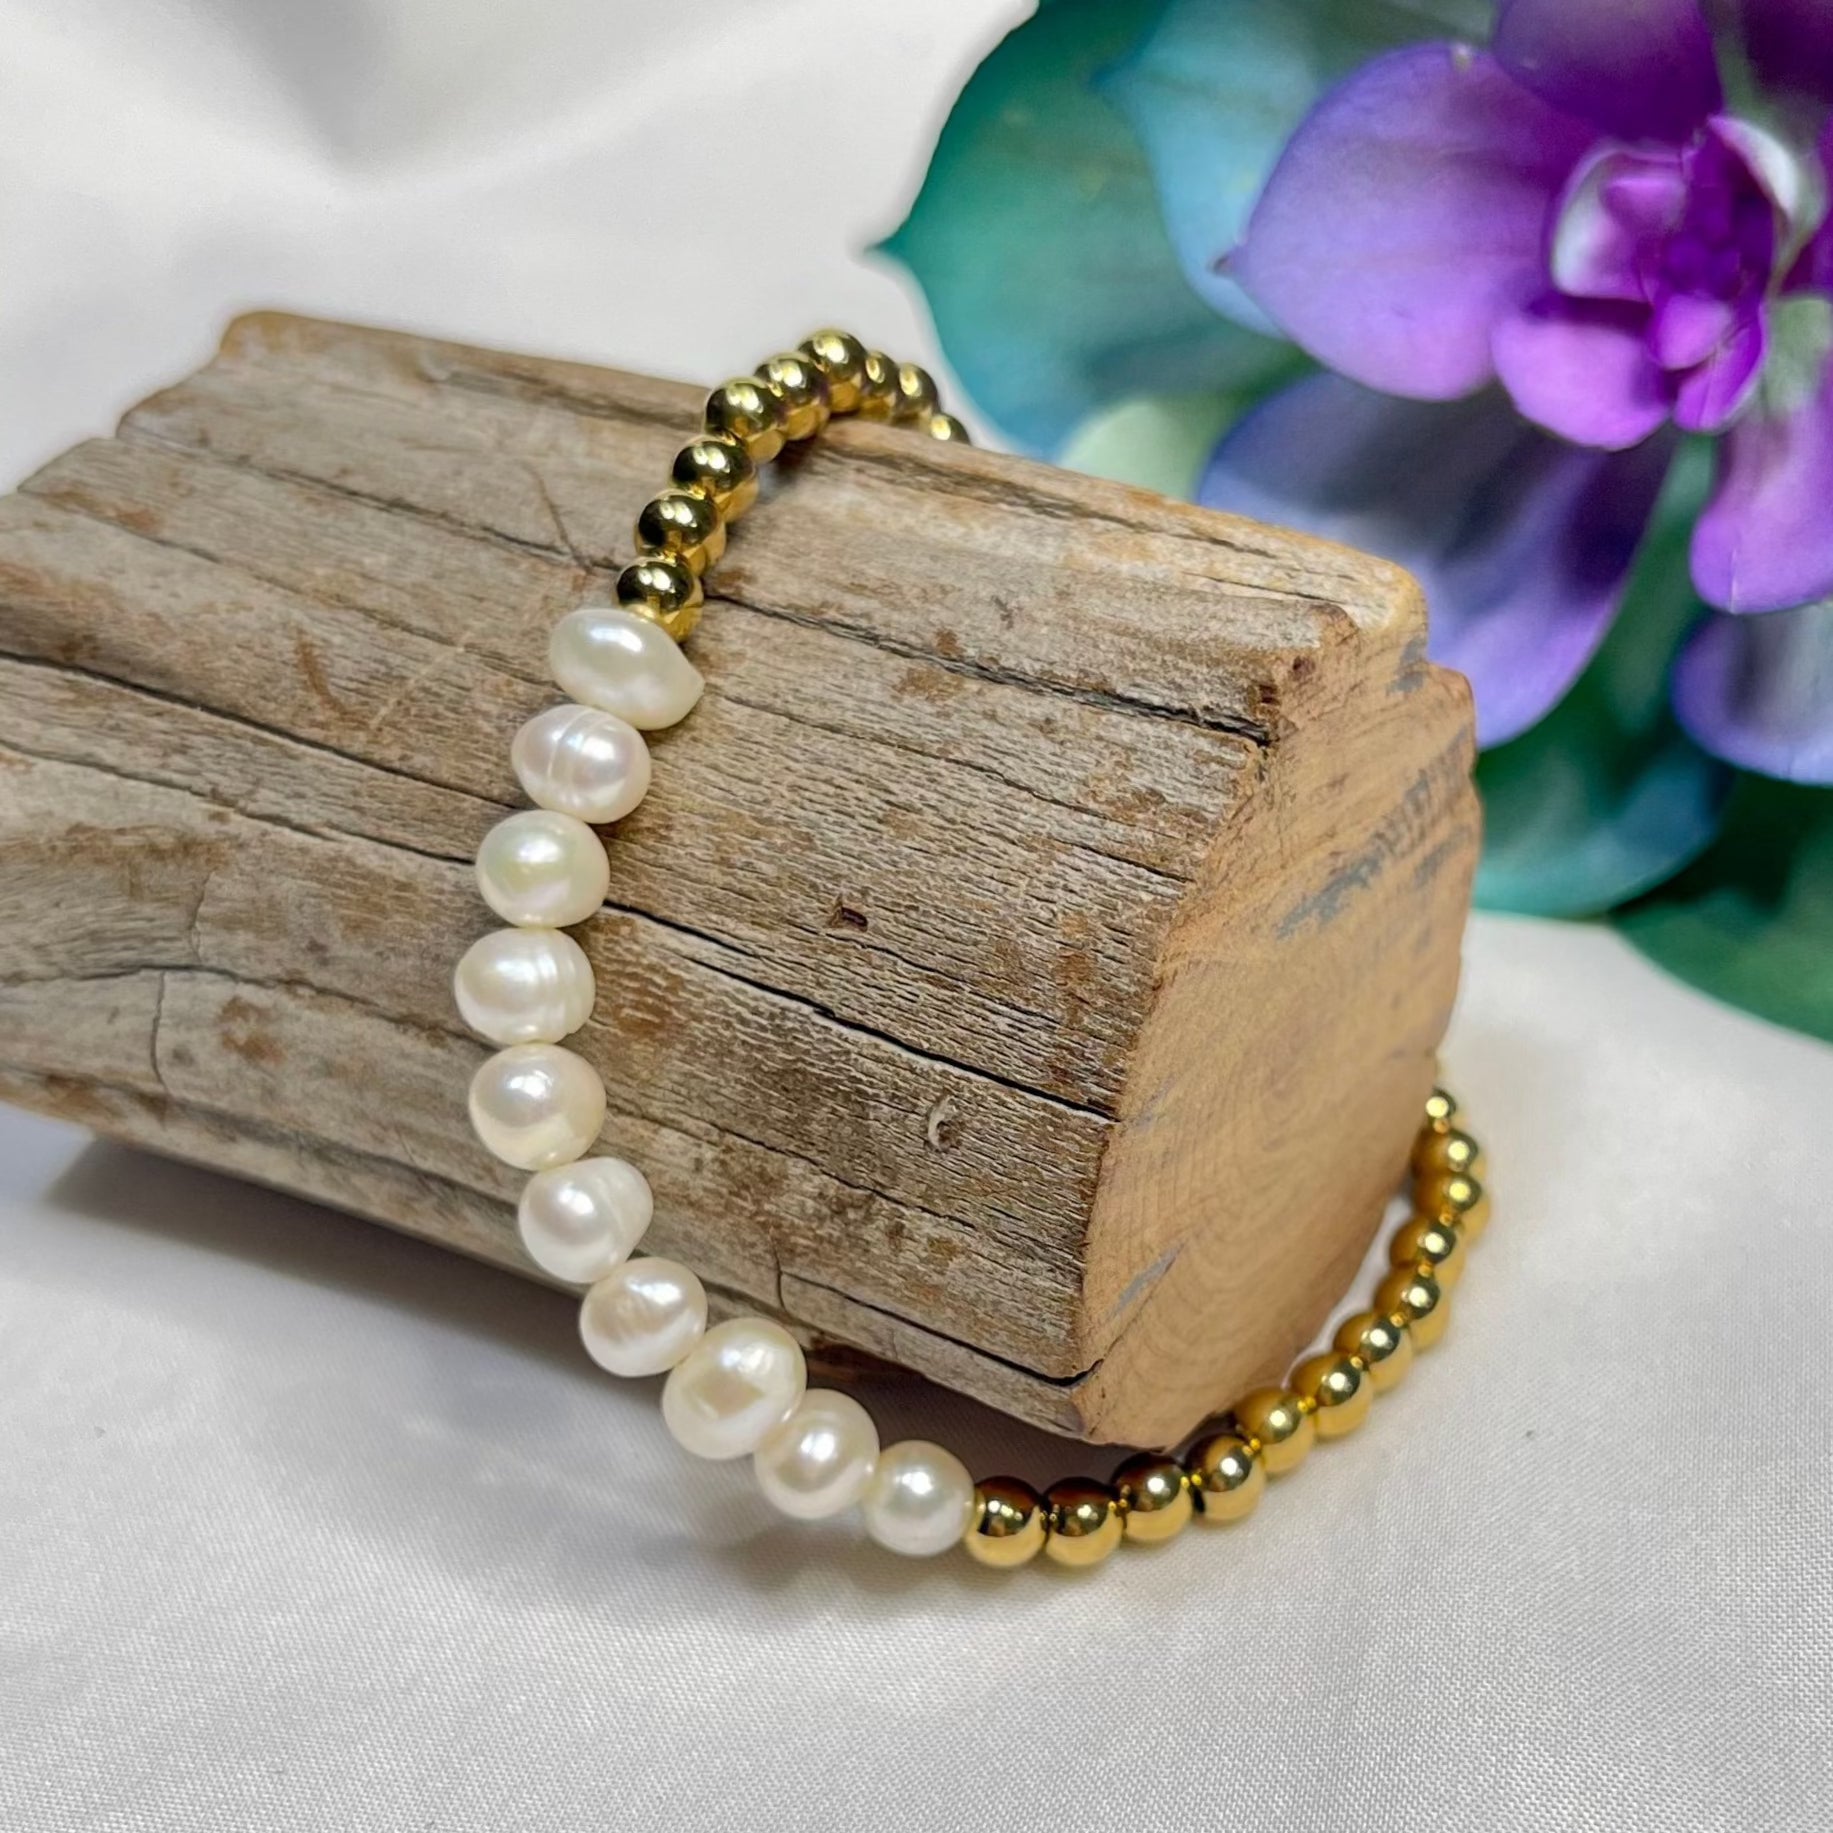 Classic gold and pearls bracelet | Dainty gold beads bracelet | pearls ...